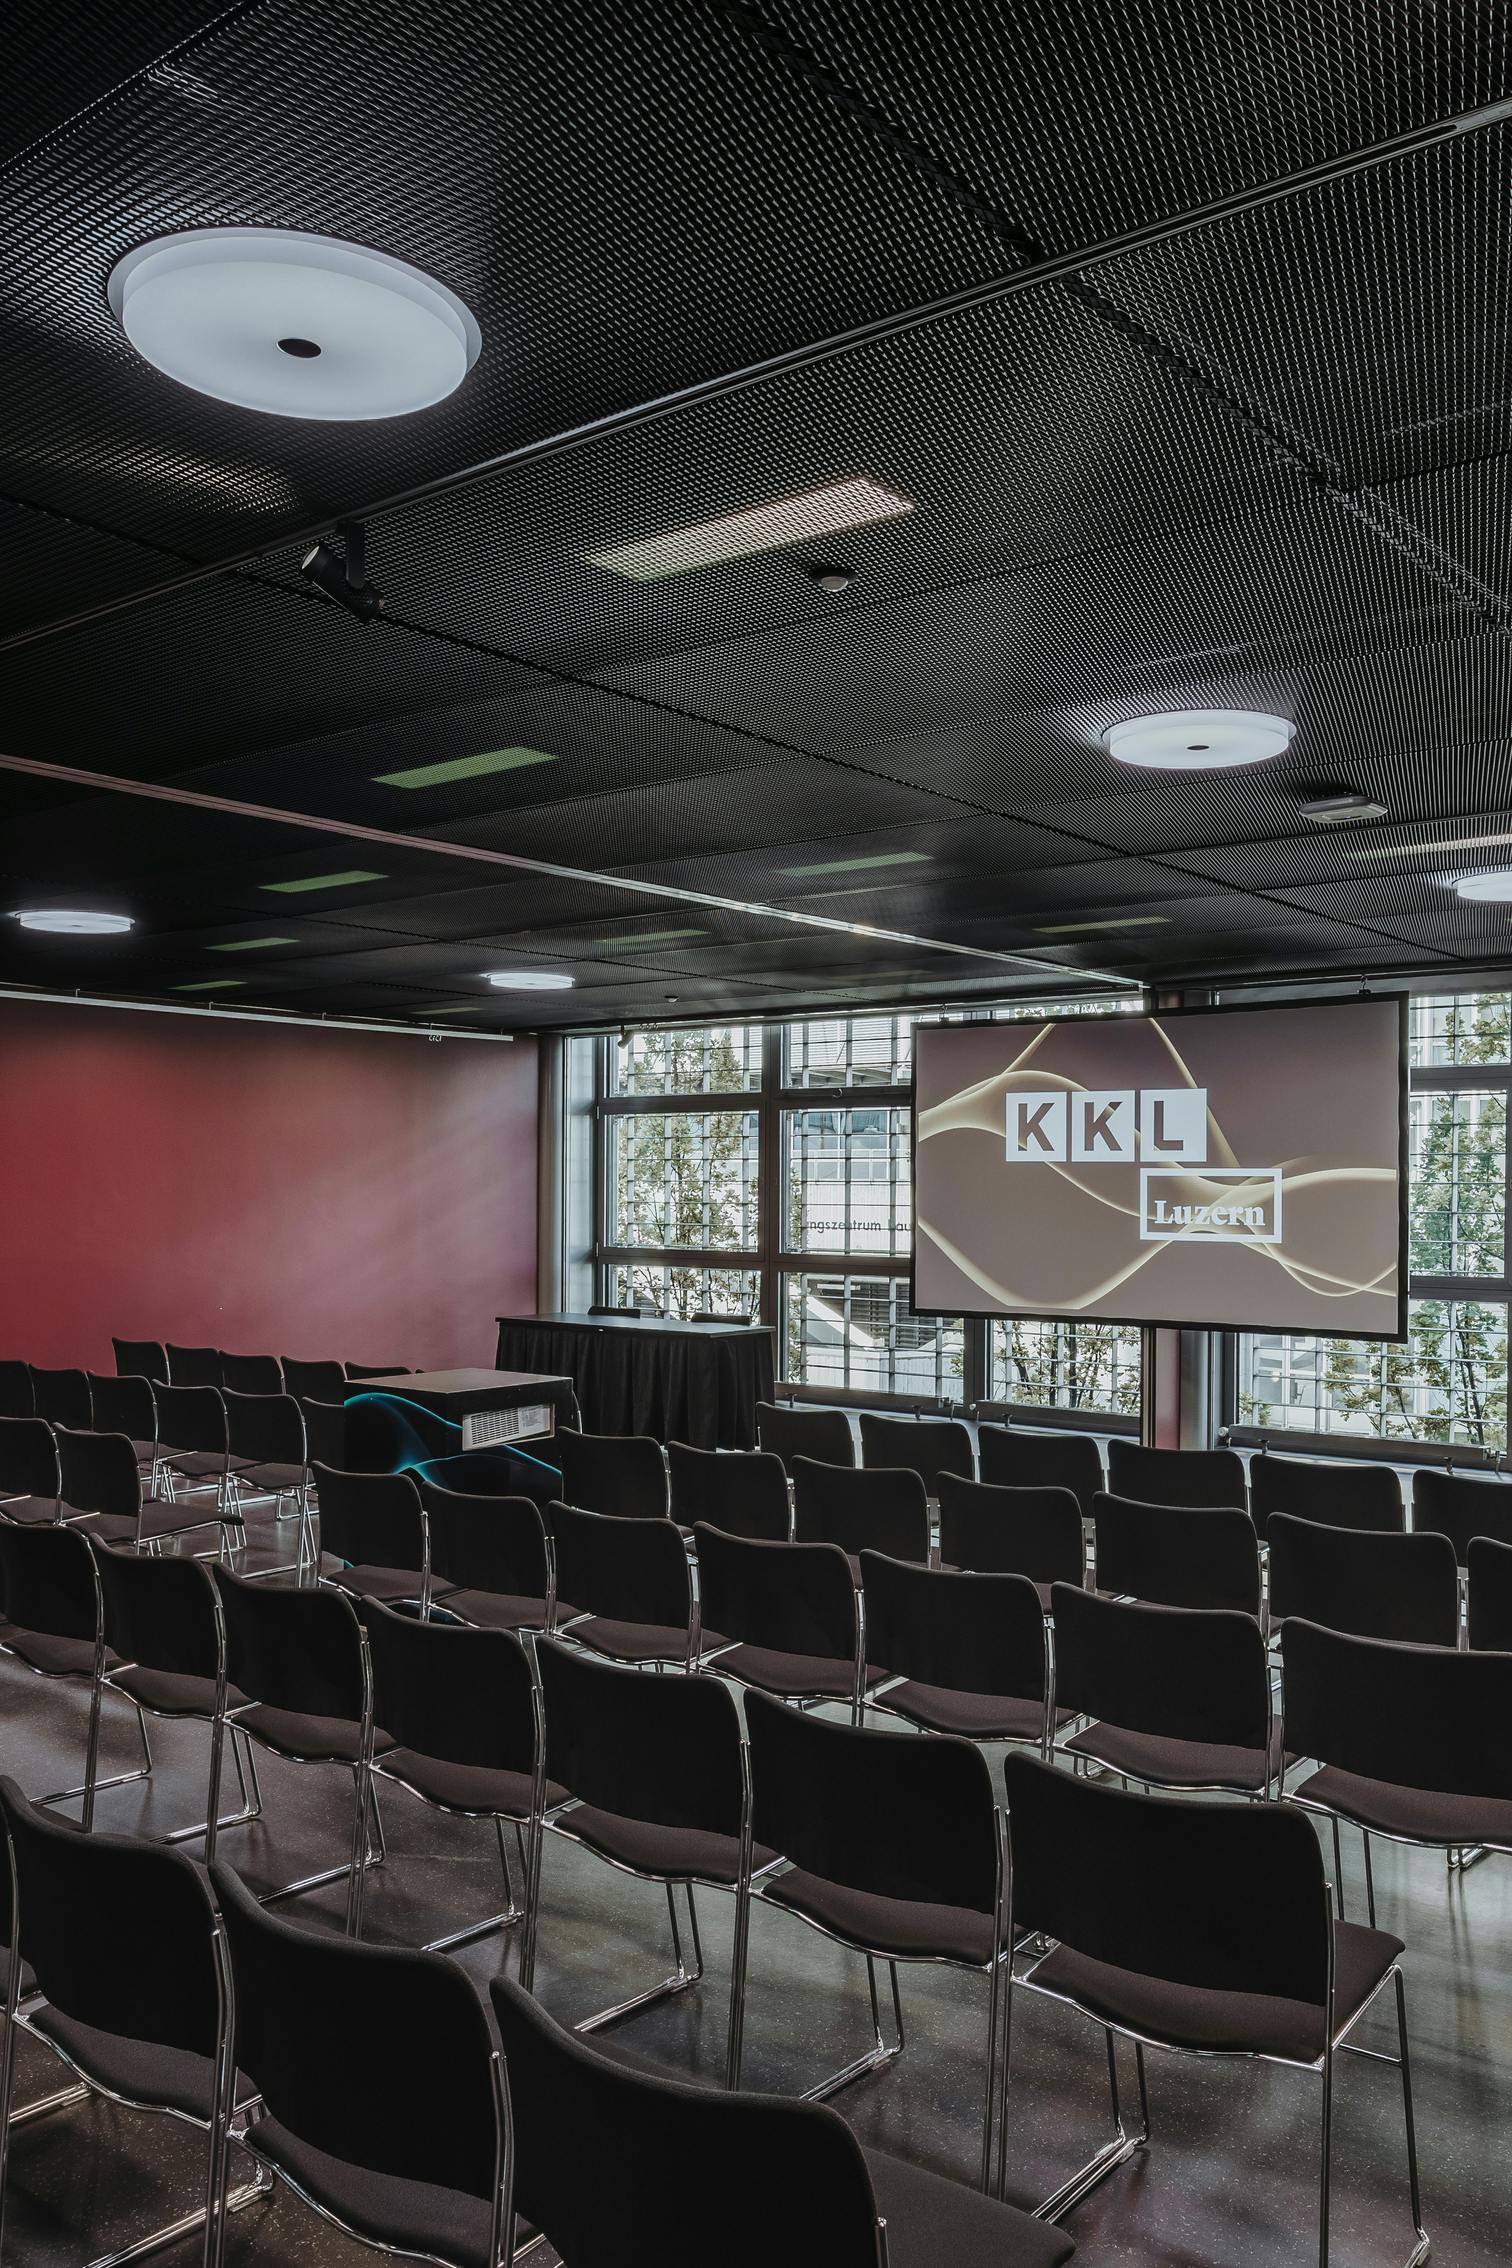 Row seating Clubrooms in KKL Luzern with LED Screen